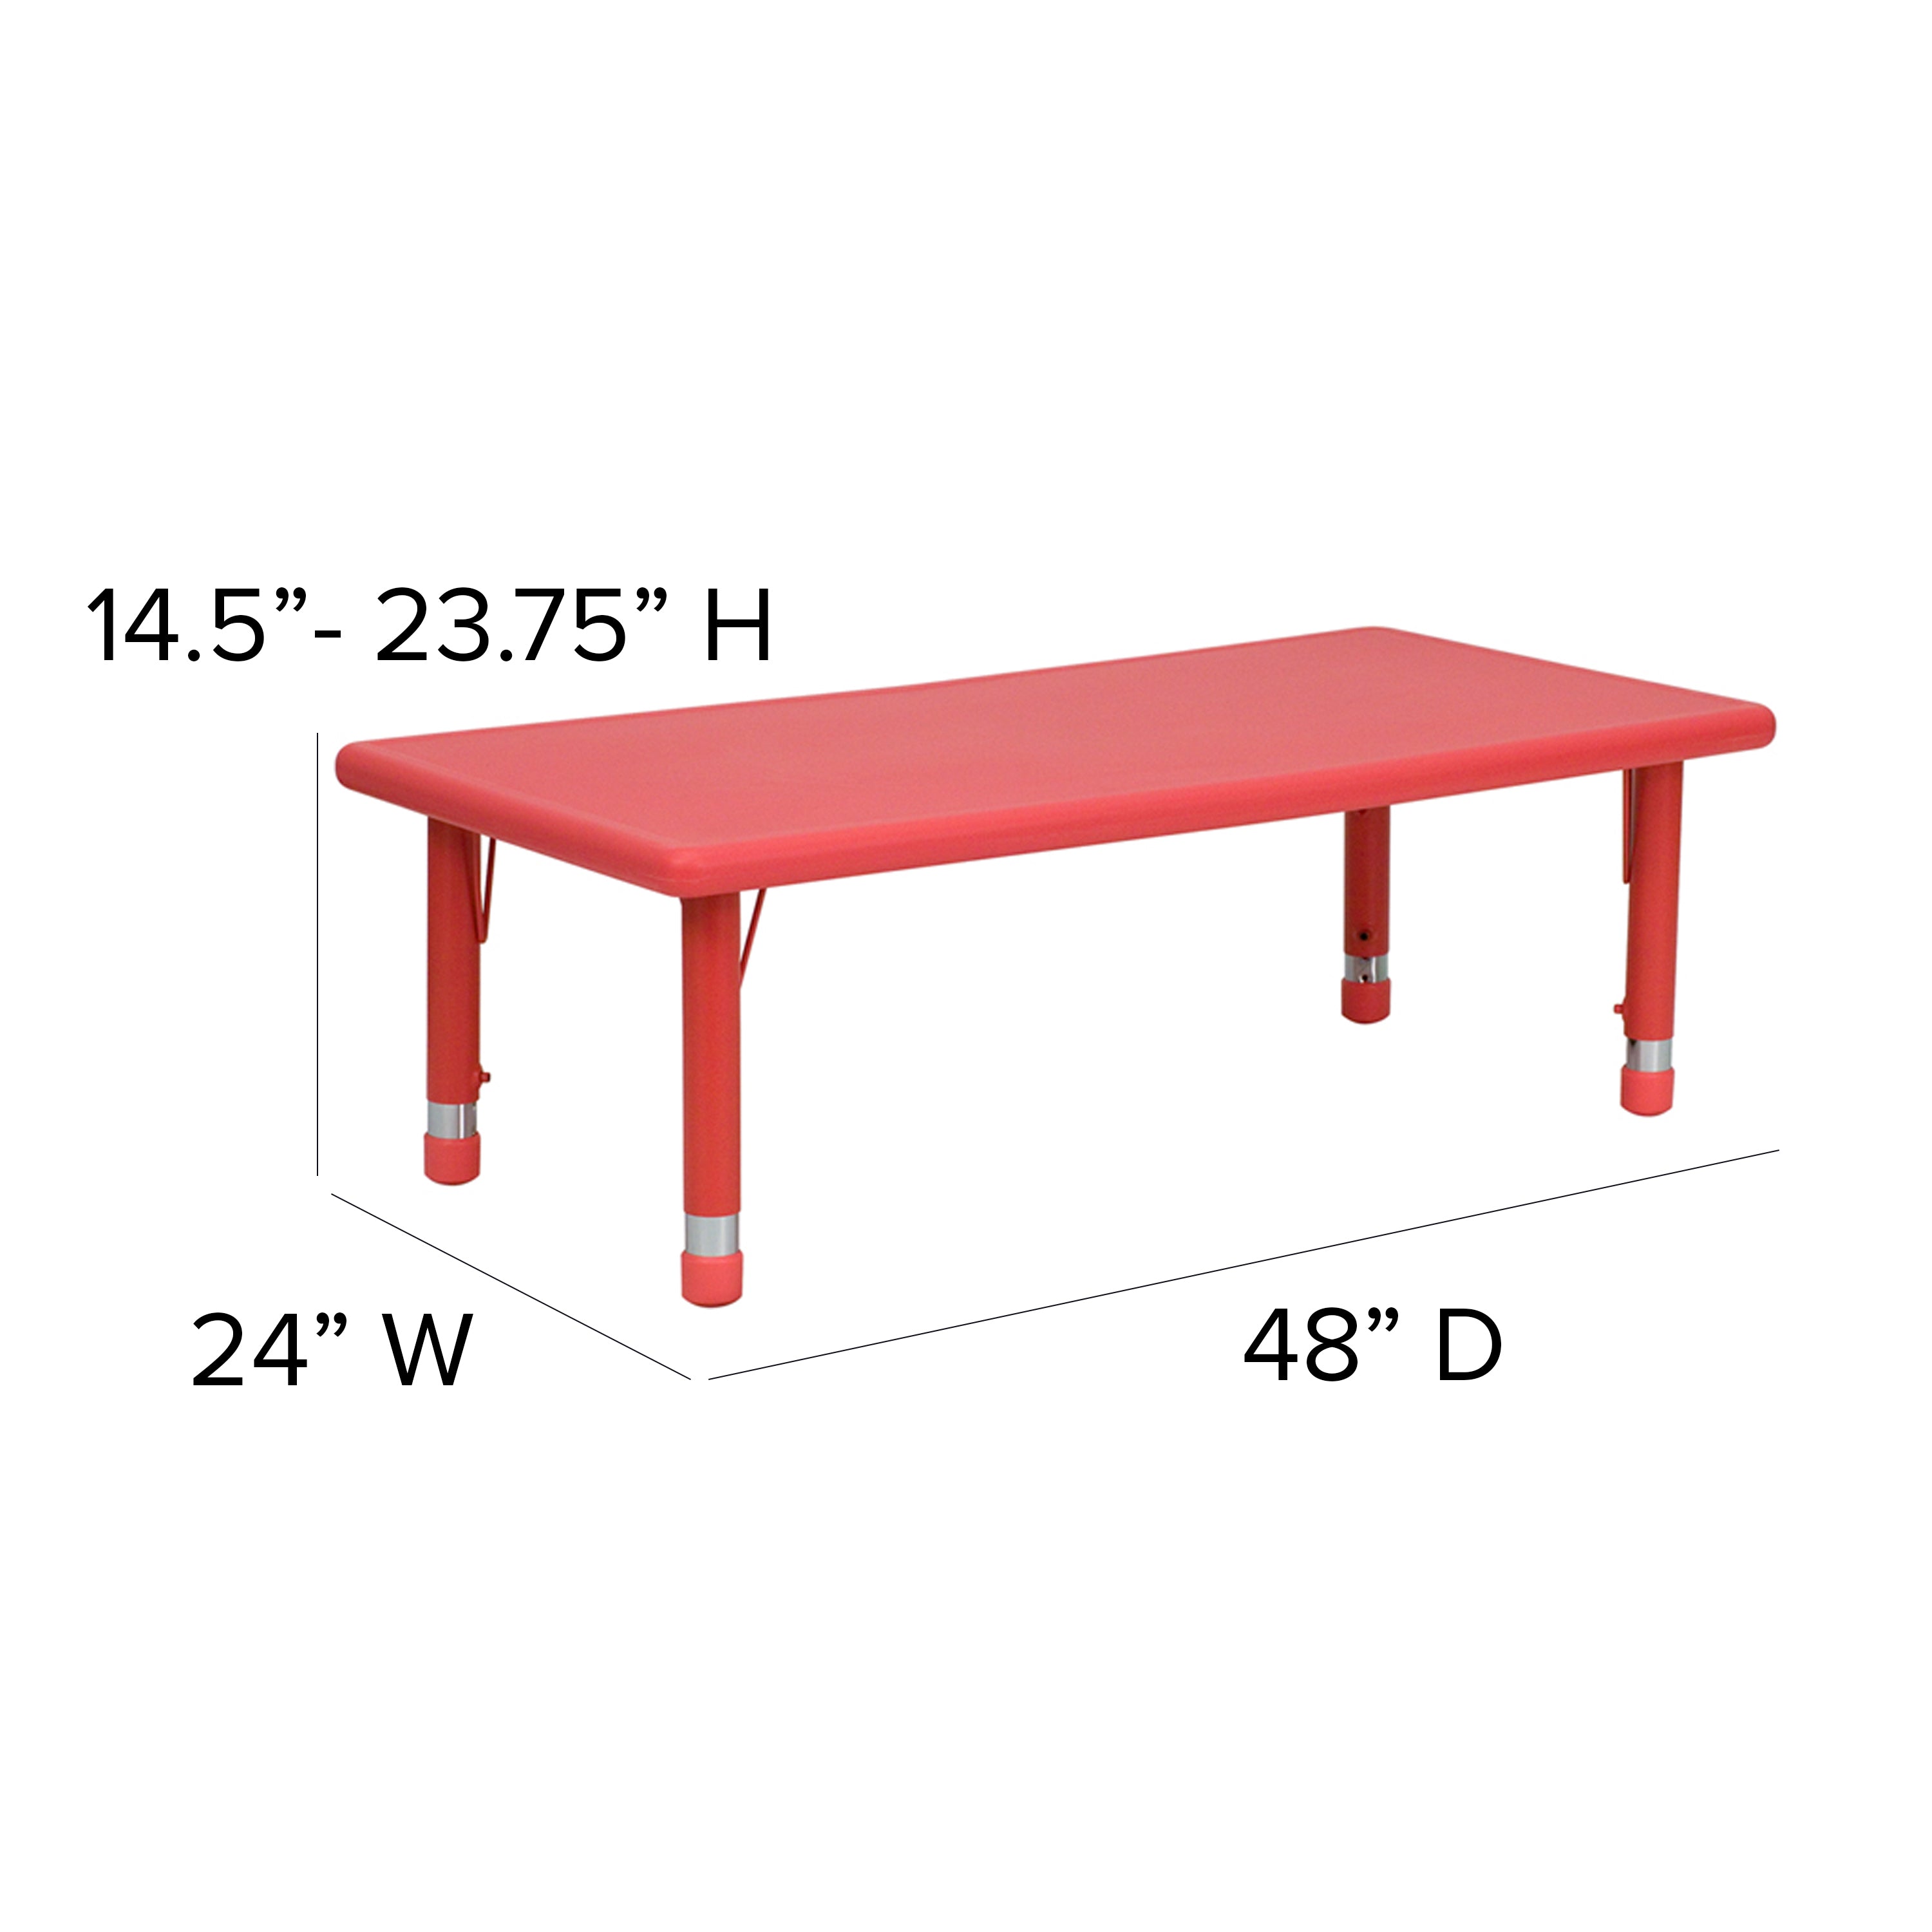 24"W x 48"L Rectangular Plastic Height Adjustable Activity Table Set with 4 Chairs-Rectangular Activity Table Set-Flash Furniture-Wall2Wall Furnishings